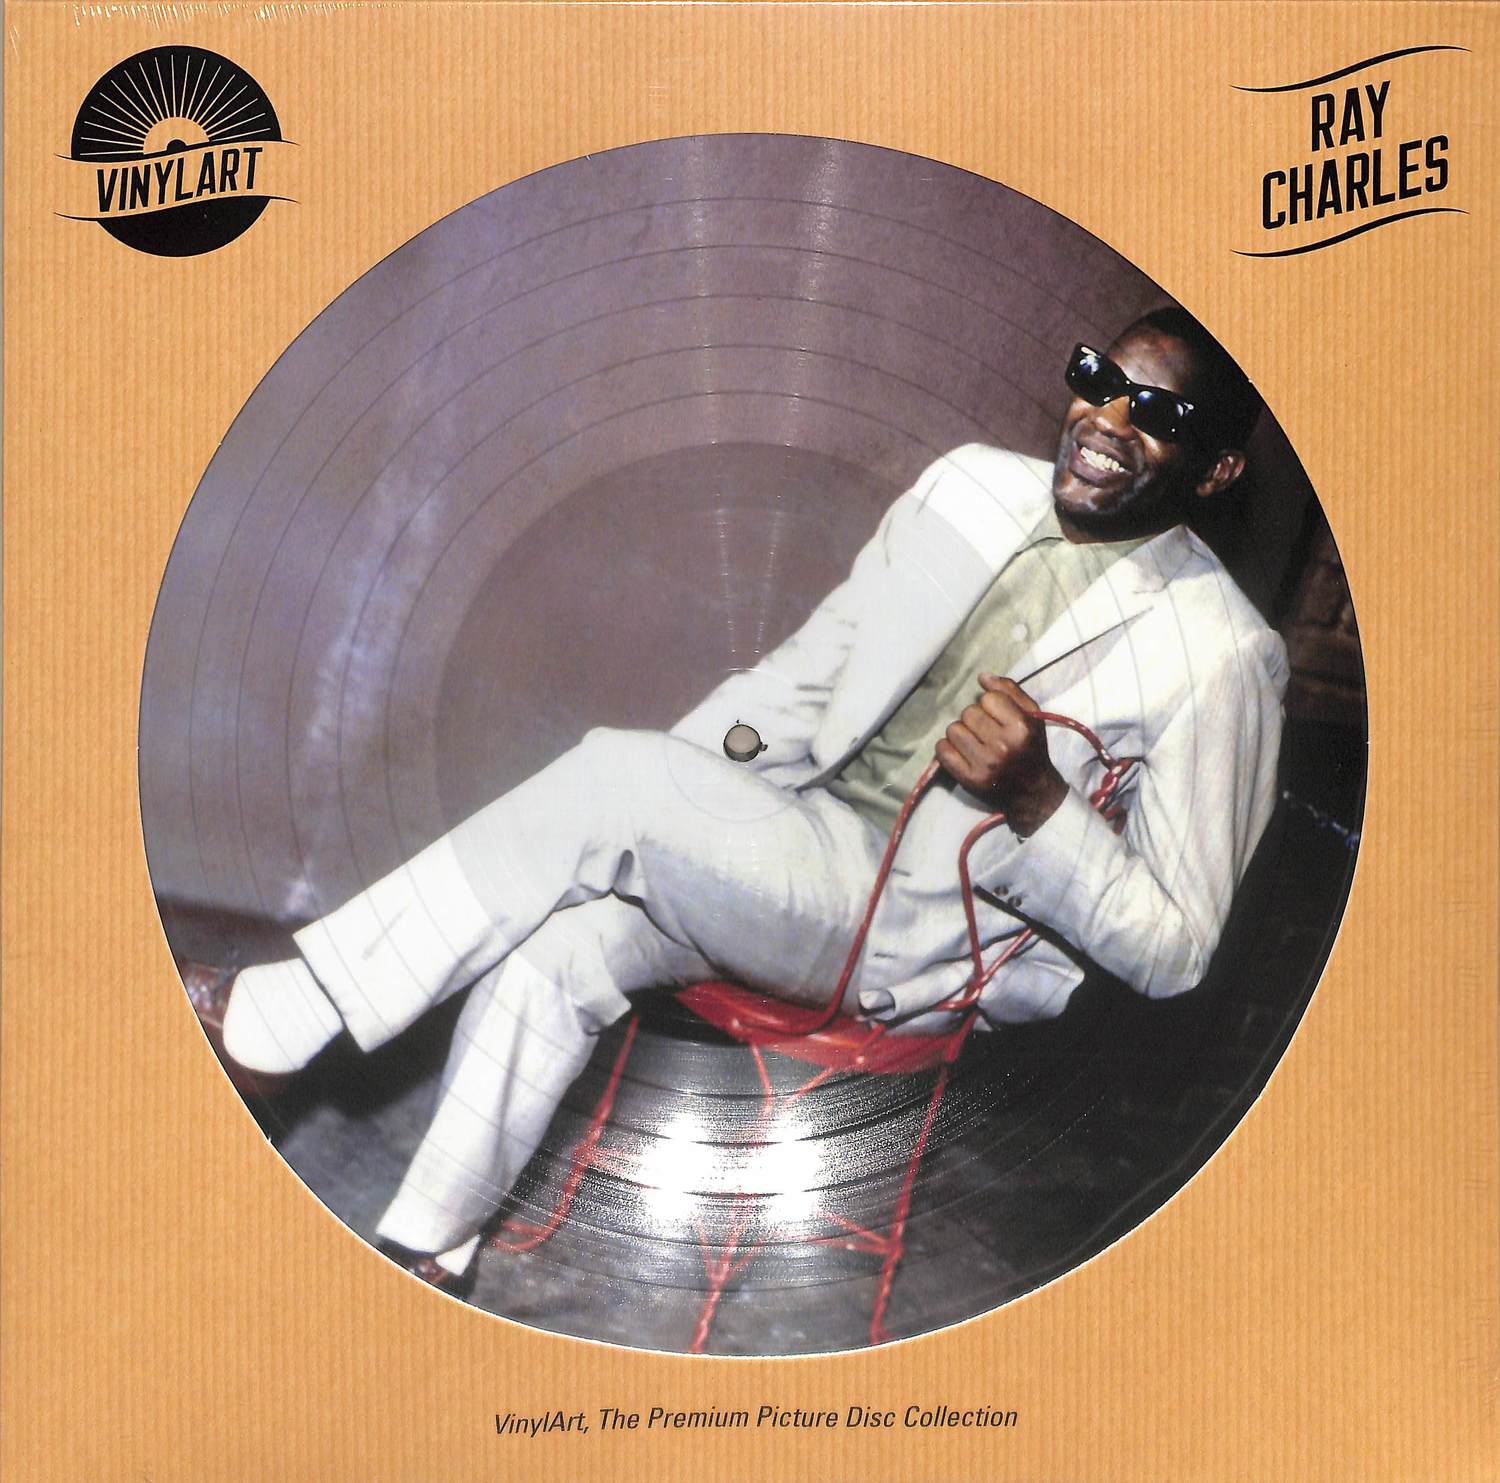 Ray Charles - VINYLART - THE PREMIUM PICTURE DISC COLLECTION 